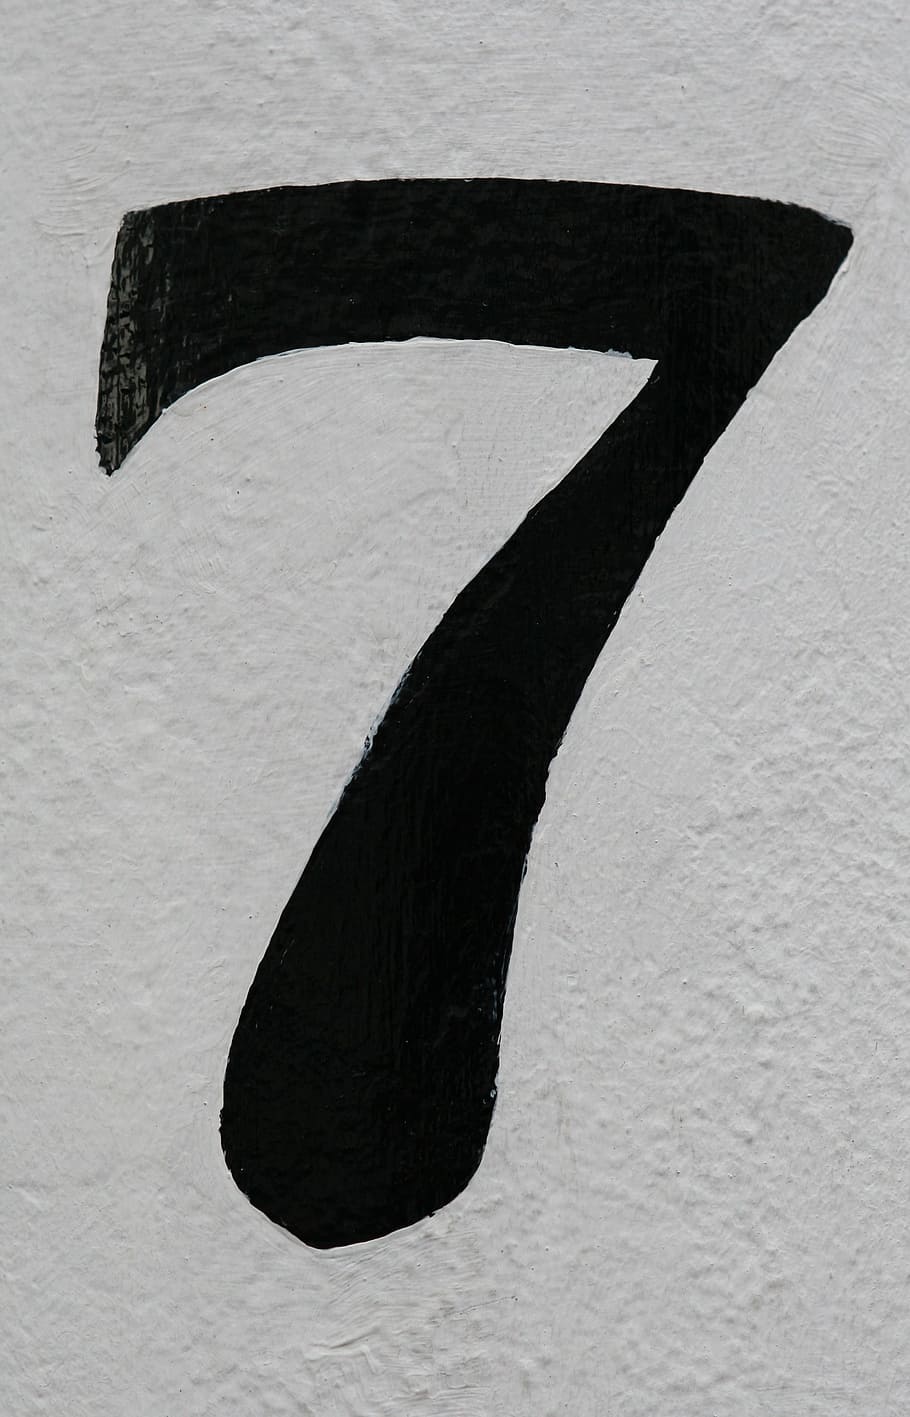 7 illustration, number, 7, abstract, address, seven, calligraphy, black color, wall - building feature, art and craft